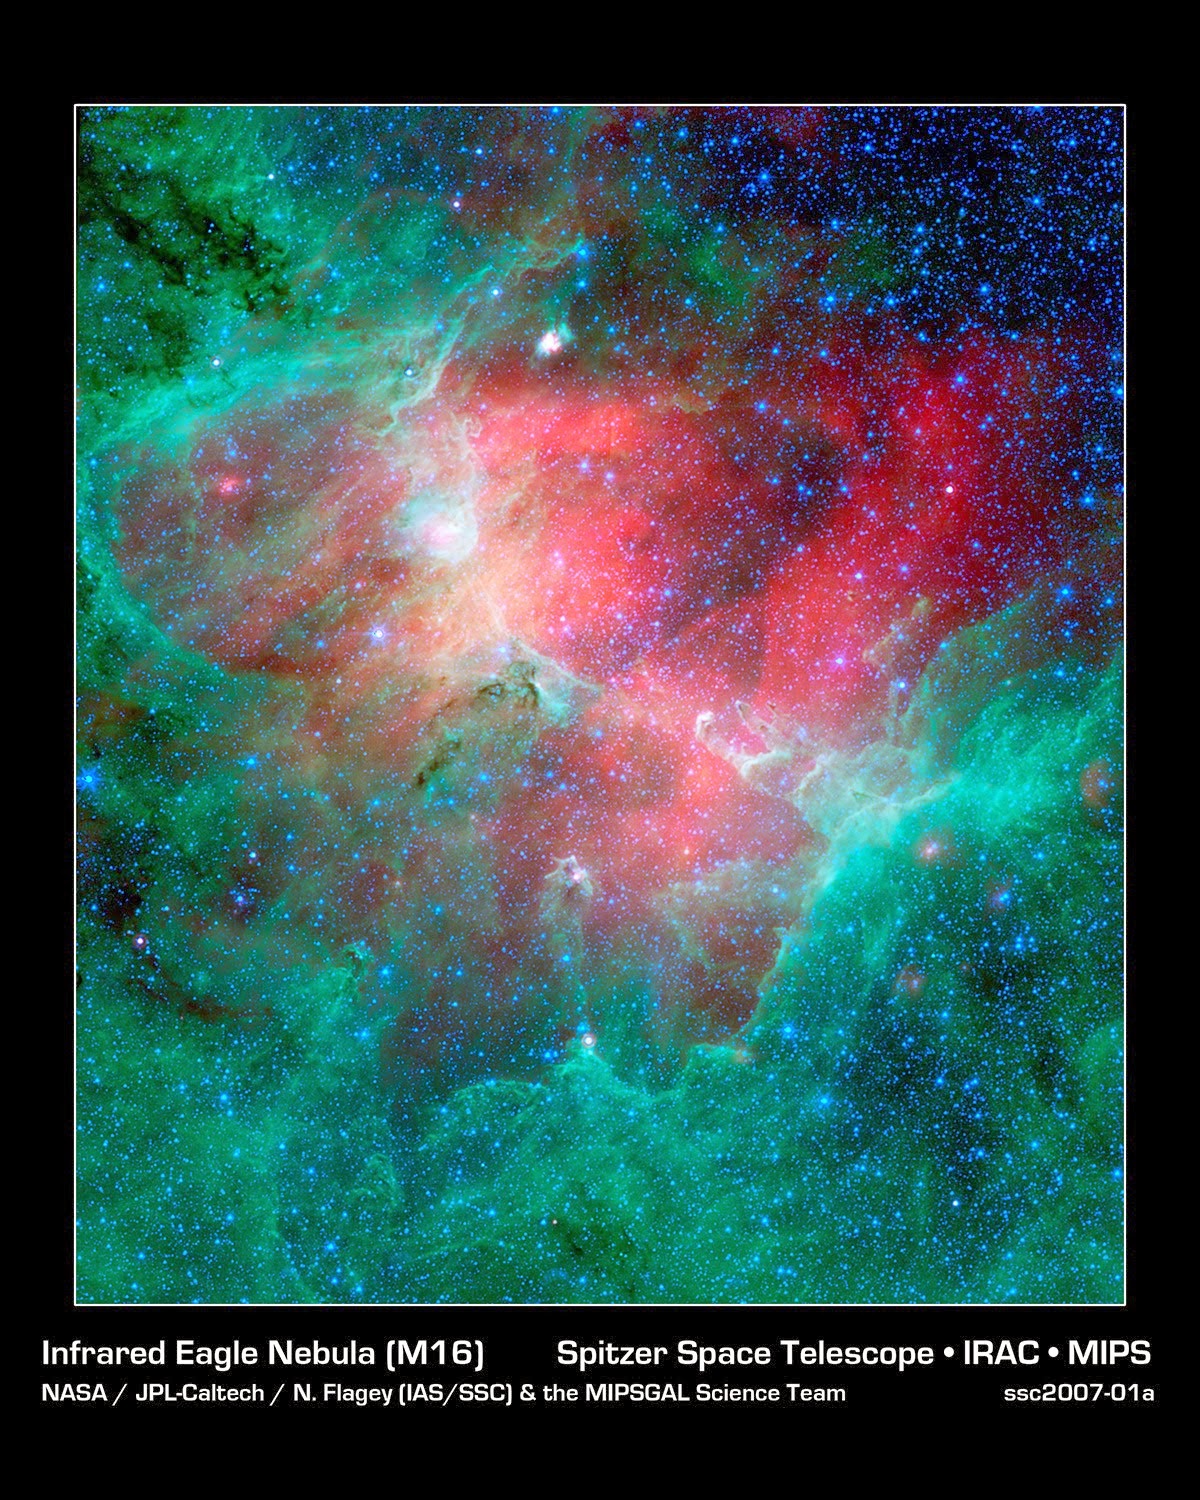 Cosmic Epic Unfolds in Infrared: The Eagle Nebula